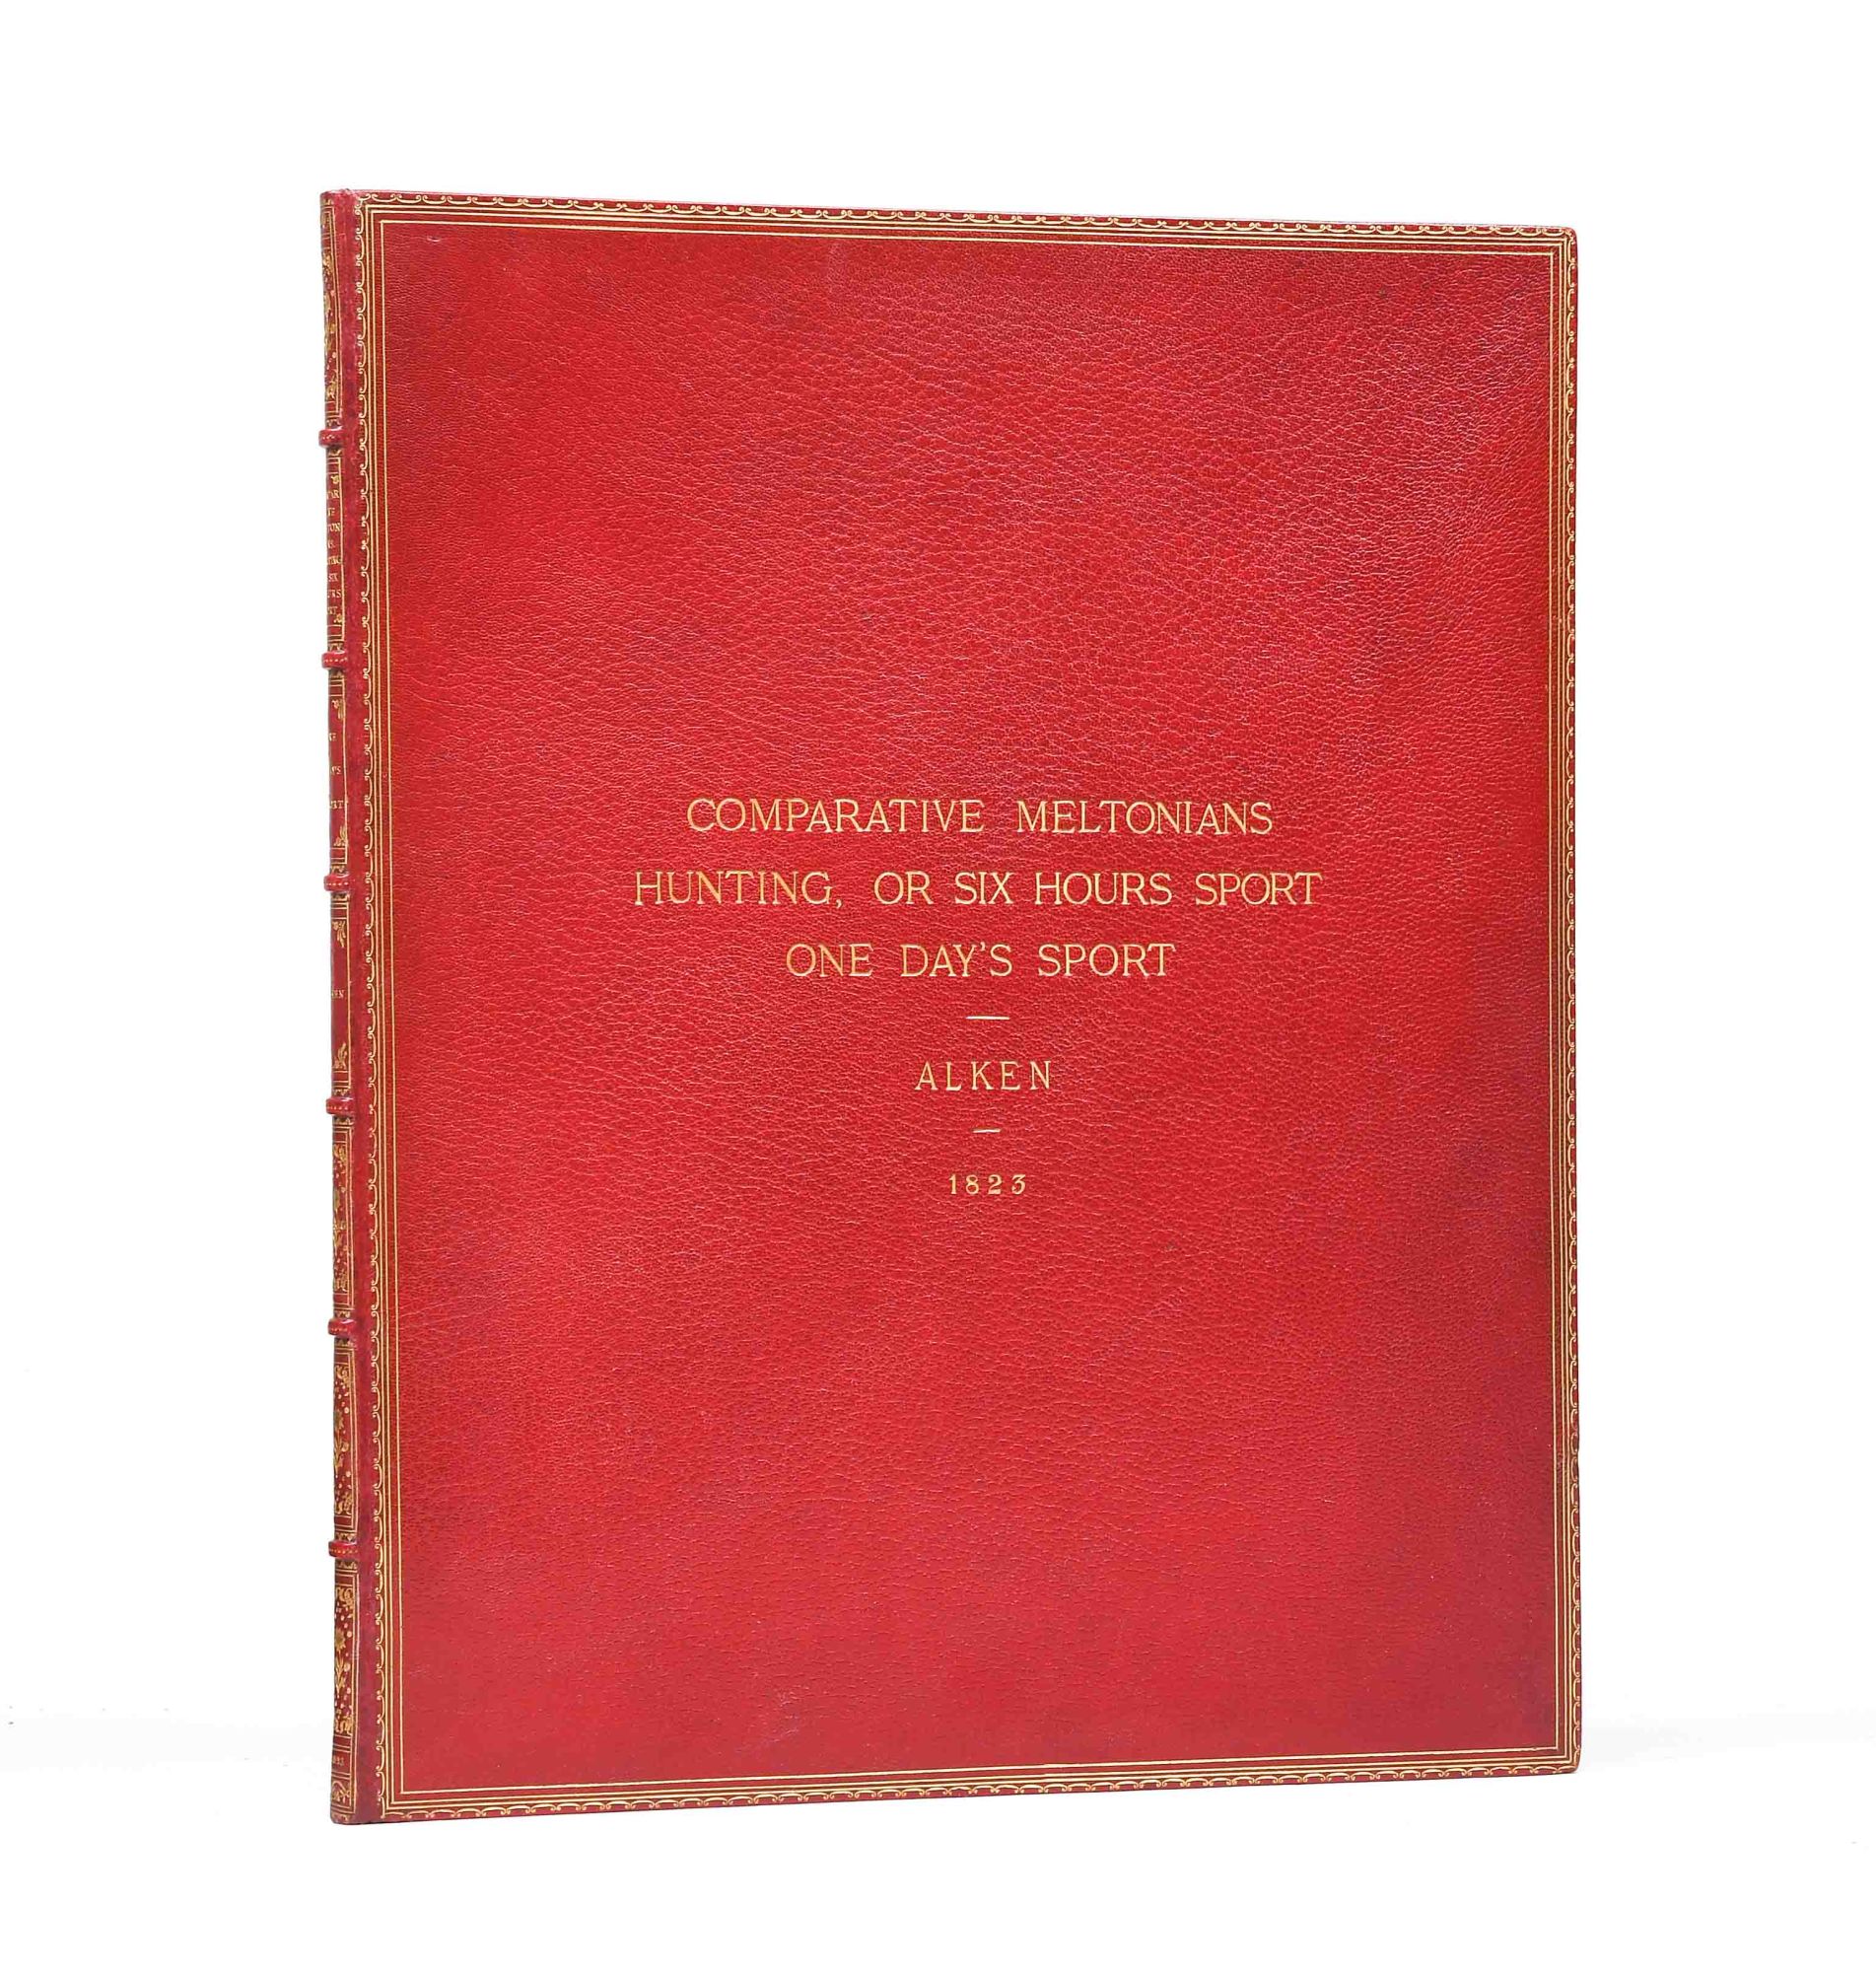 (Item #4043) Comparative Meltonians as They Are and As They Were, By Ben Tally-Ho. [with] Hunting, or Six Hours Sport, [with] Shooting, or One Day's Sport of Three Real Good Ones. Henry Thomas Alken.